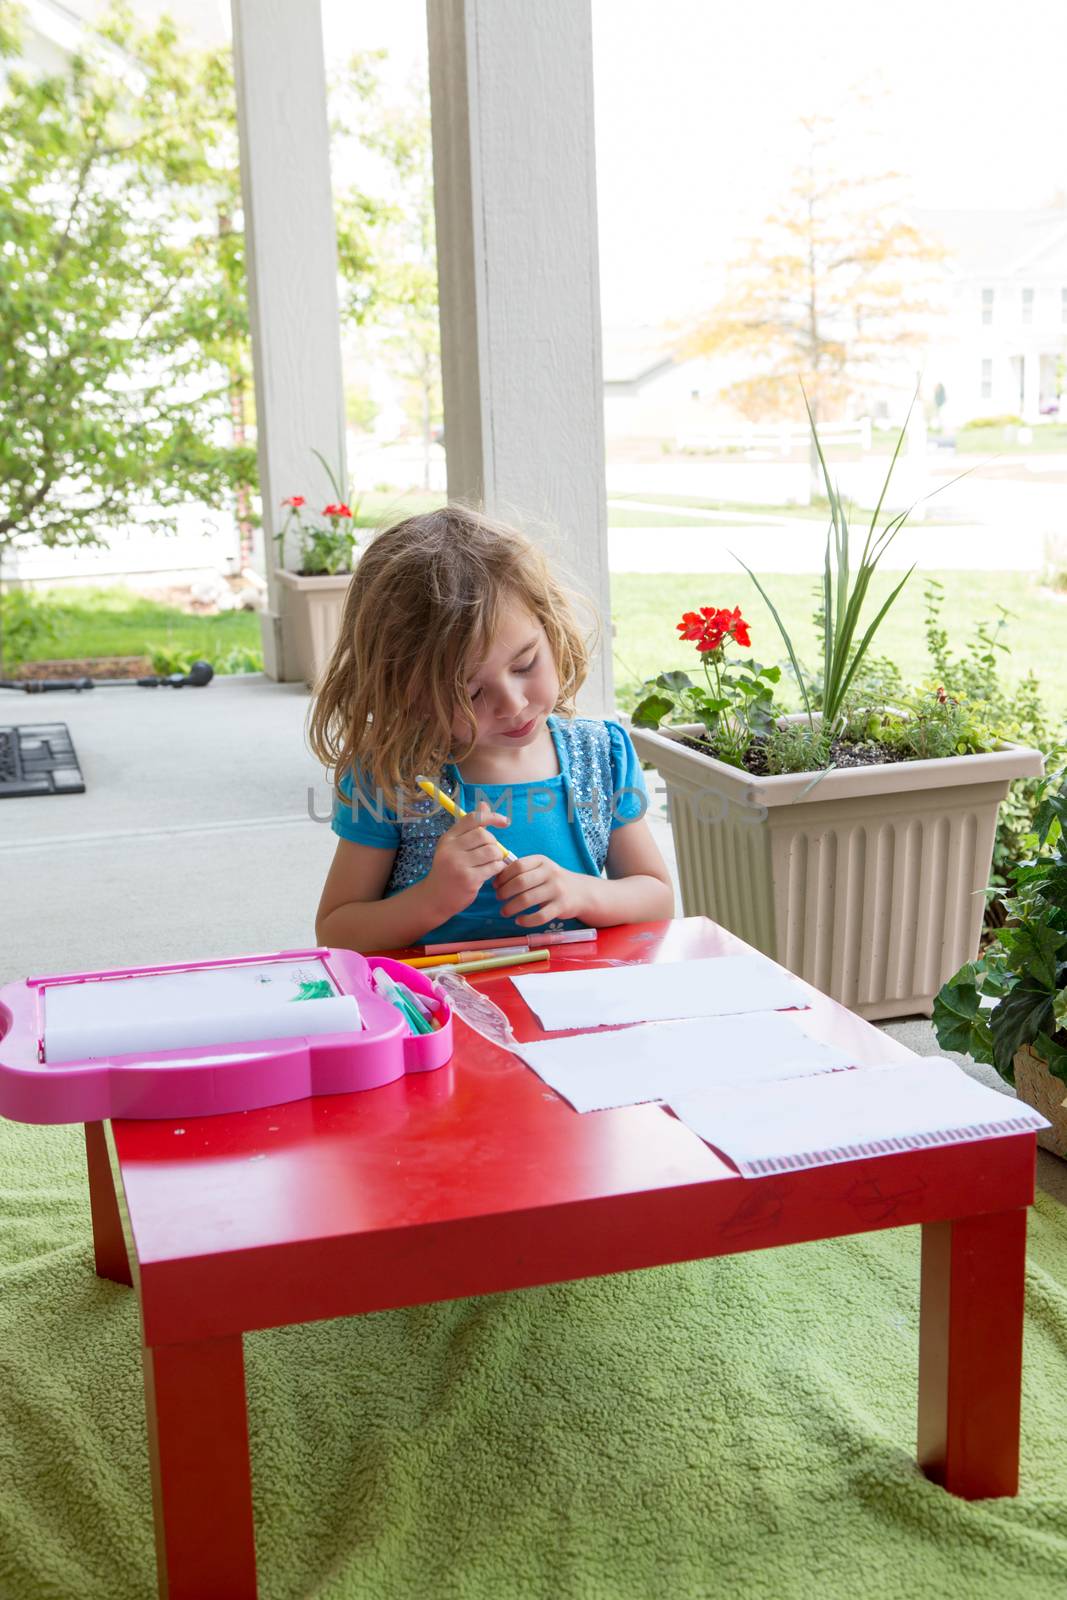 Cute little girl kneeling down at a colorful vivid red table coloring in with pencil crayons on an outdoor undercover patio in spring or summer